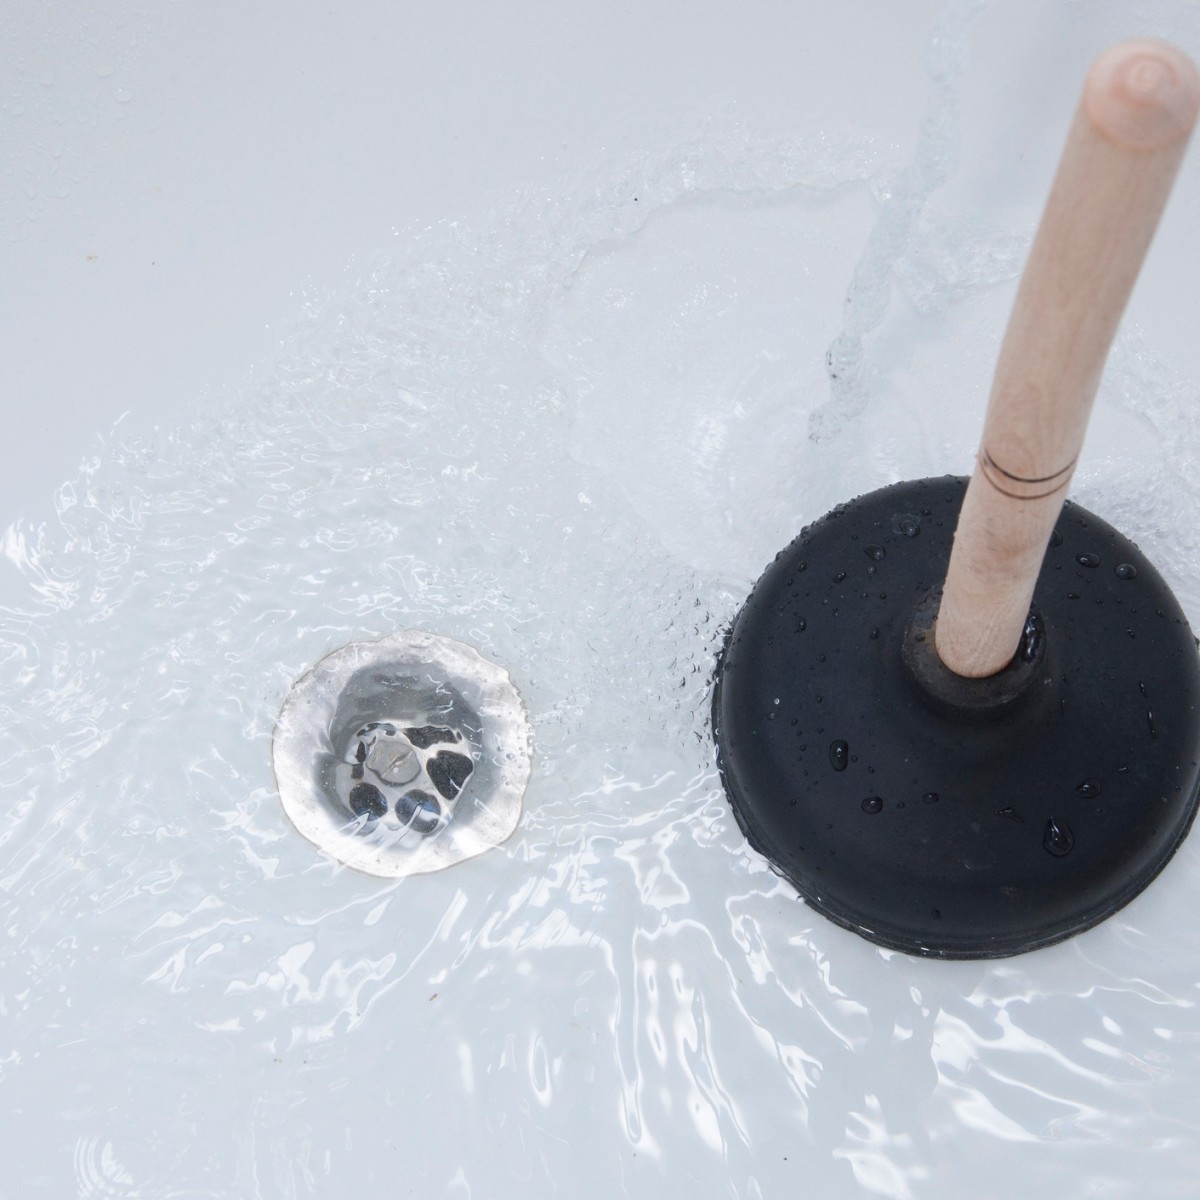 Clearing A Clogged Bathtub Drain, How To Remove Hair From Clogged Bathtub Drain